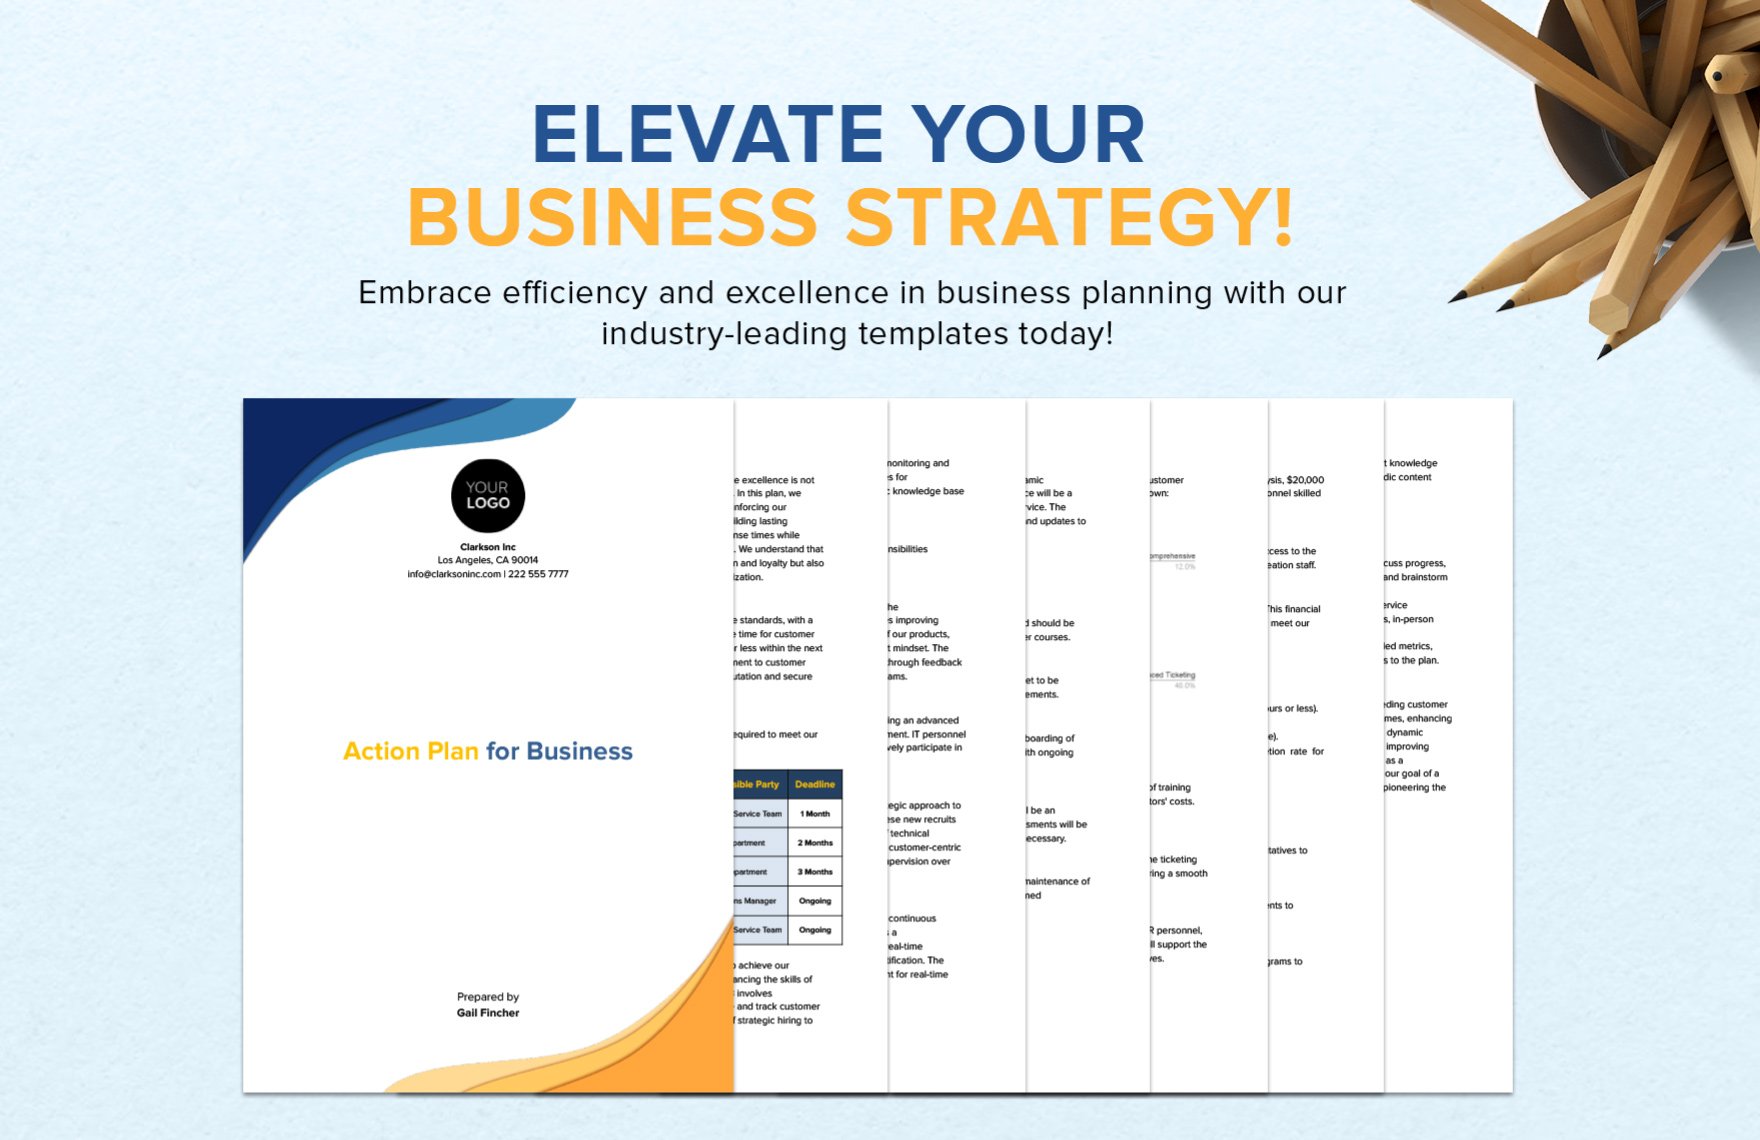 Action Plan for Business Template